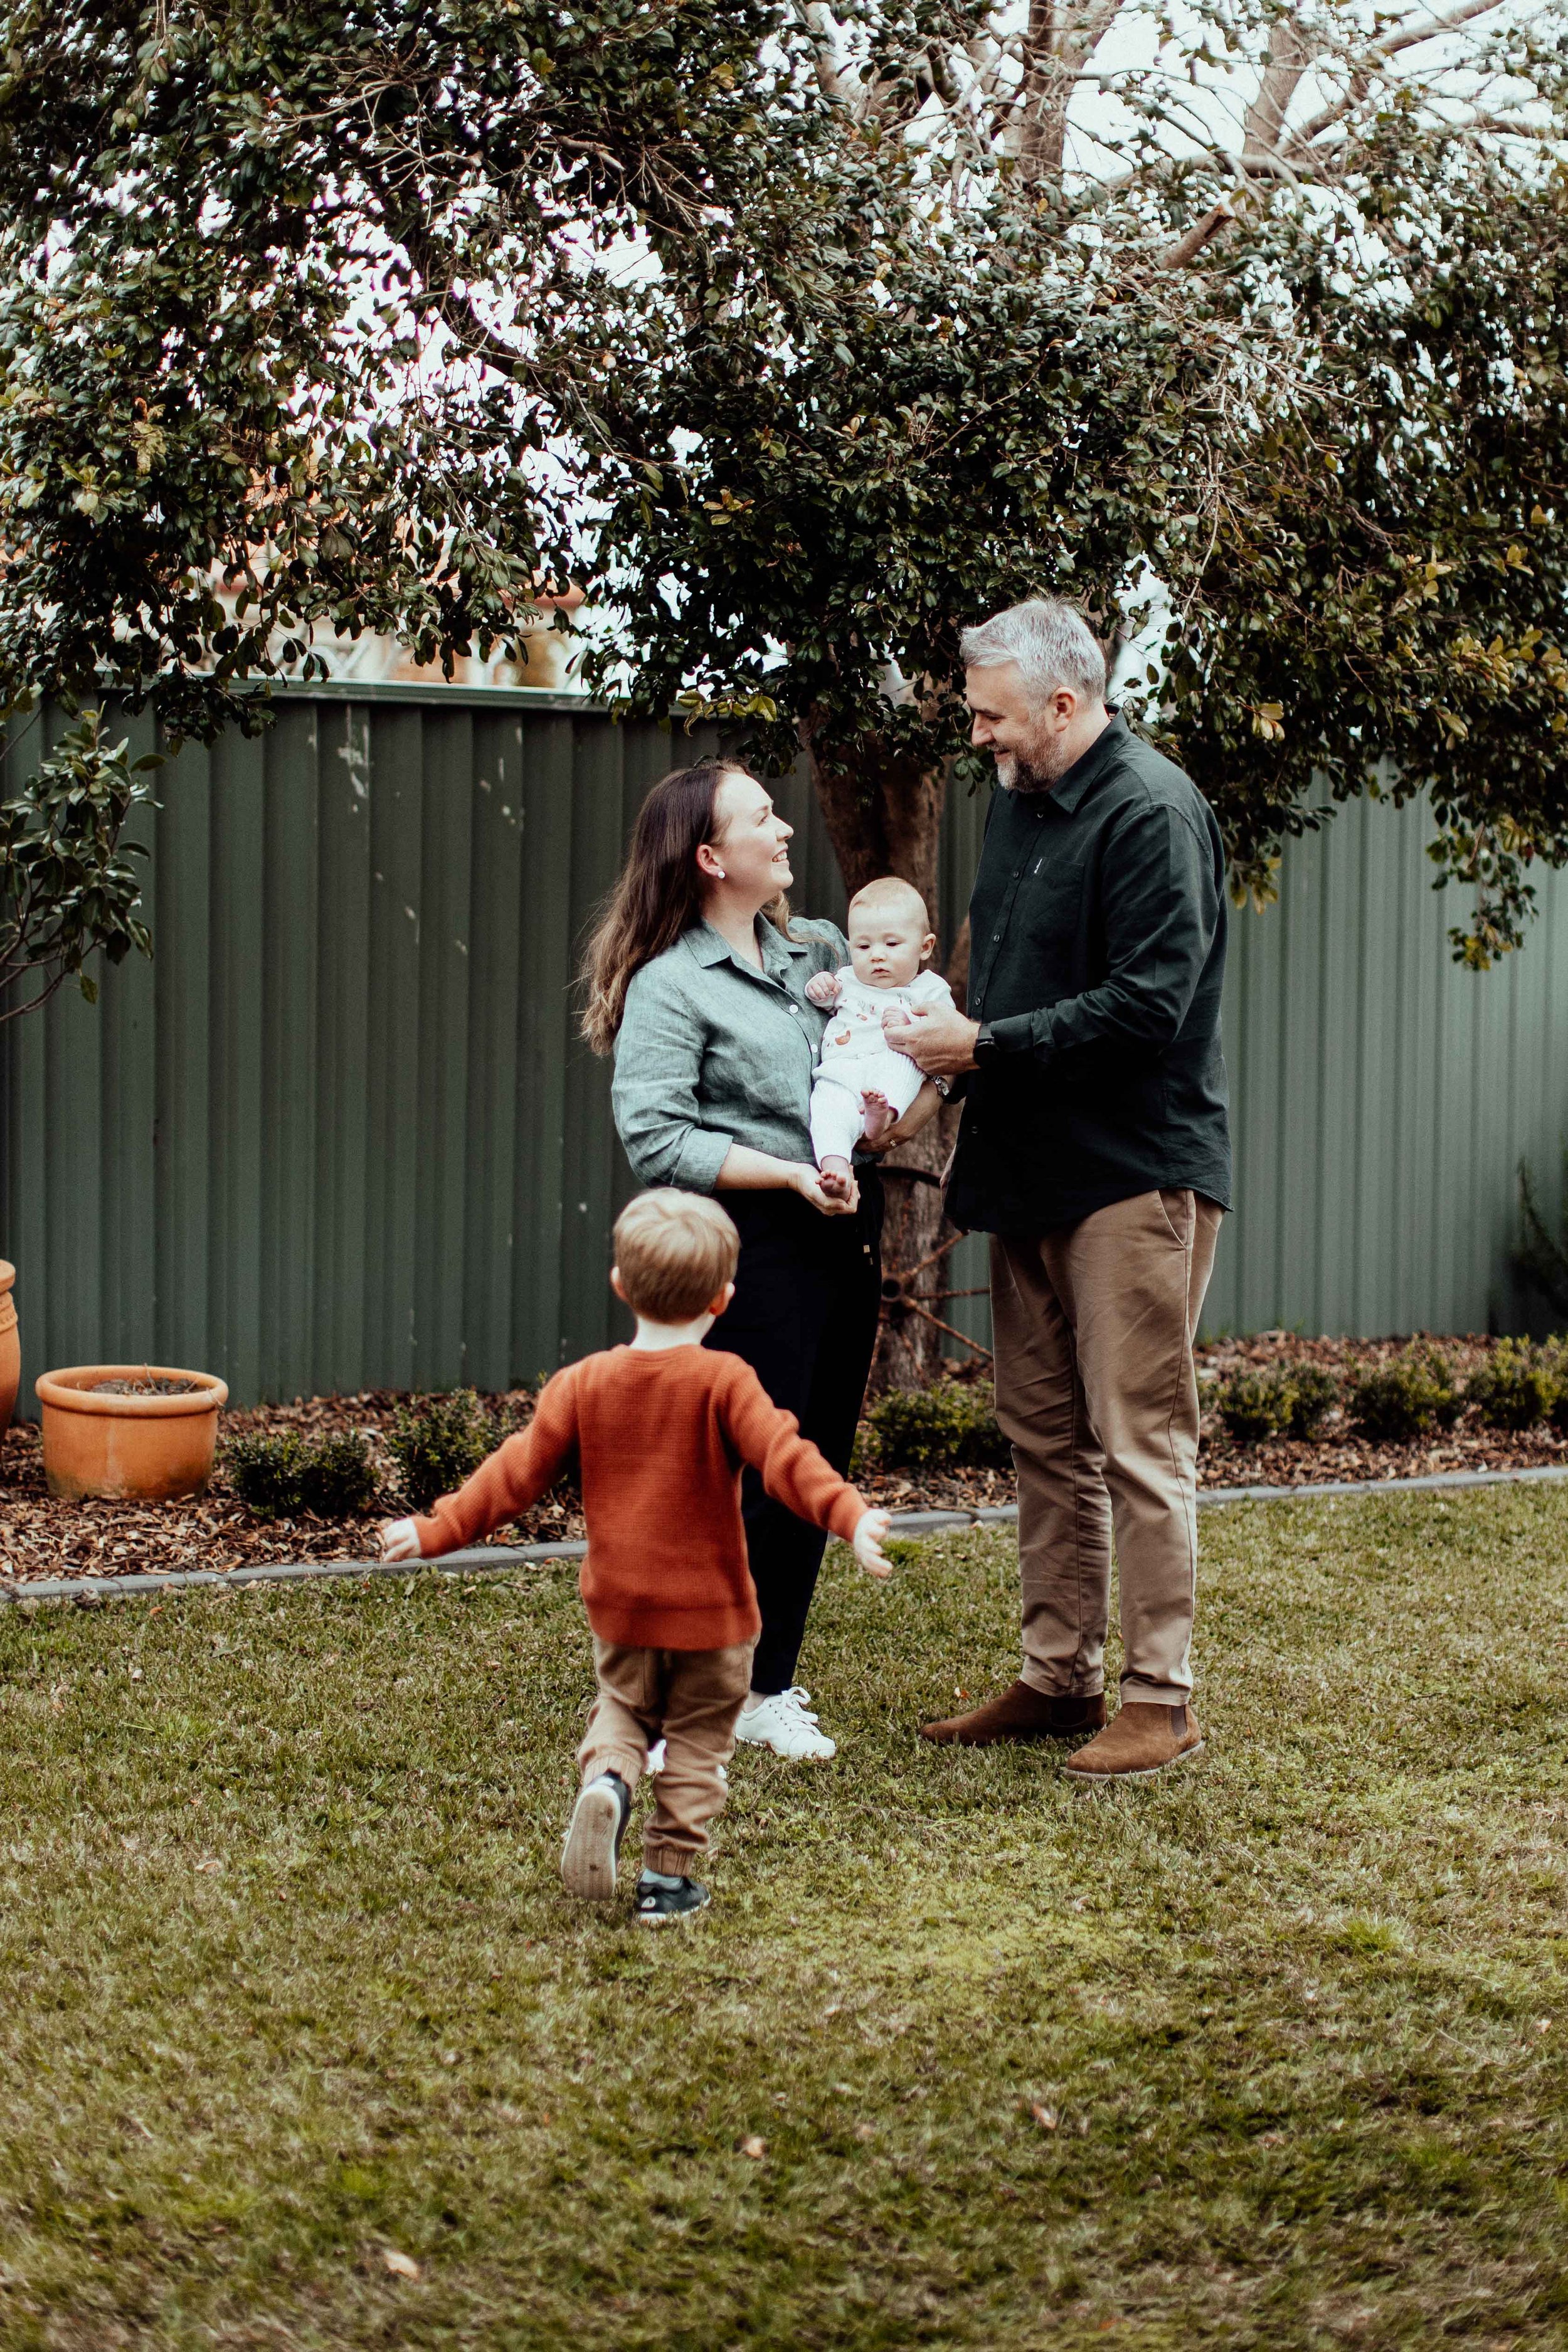 donnelly-family-inhome-family-lifestyle-wollondilly-camden-macarthur-sydney-photography-www.emilyobrienphotography.net-21.jpg